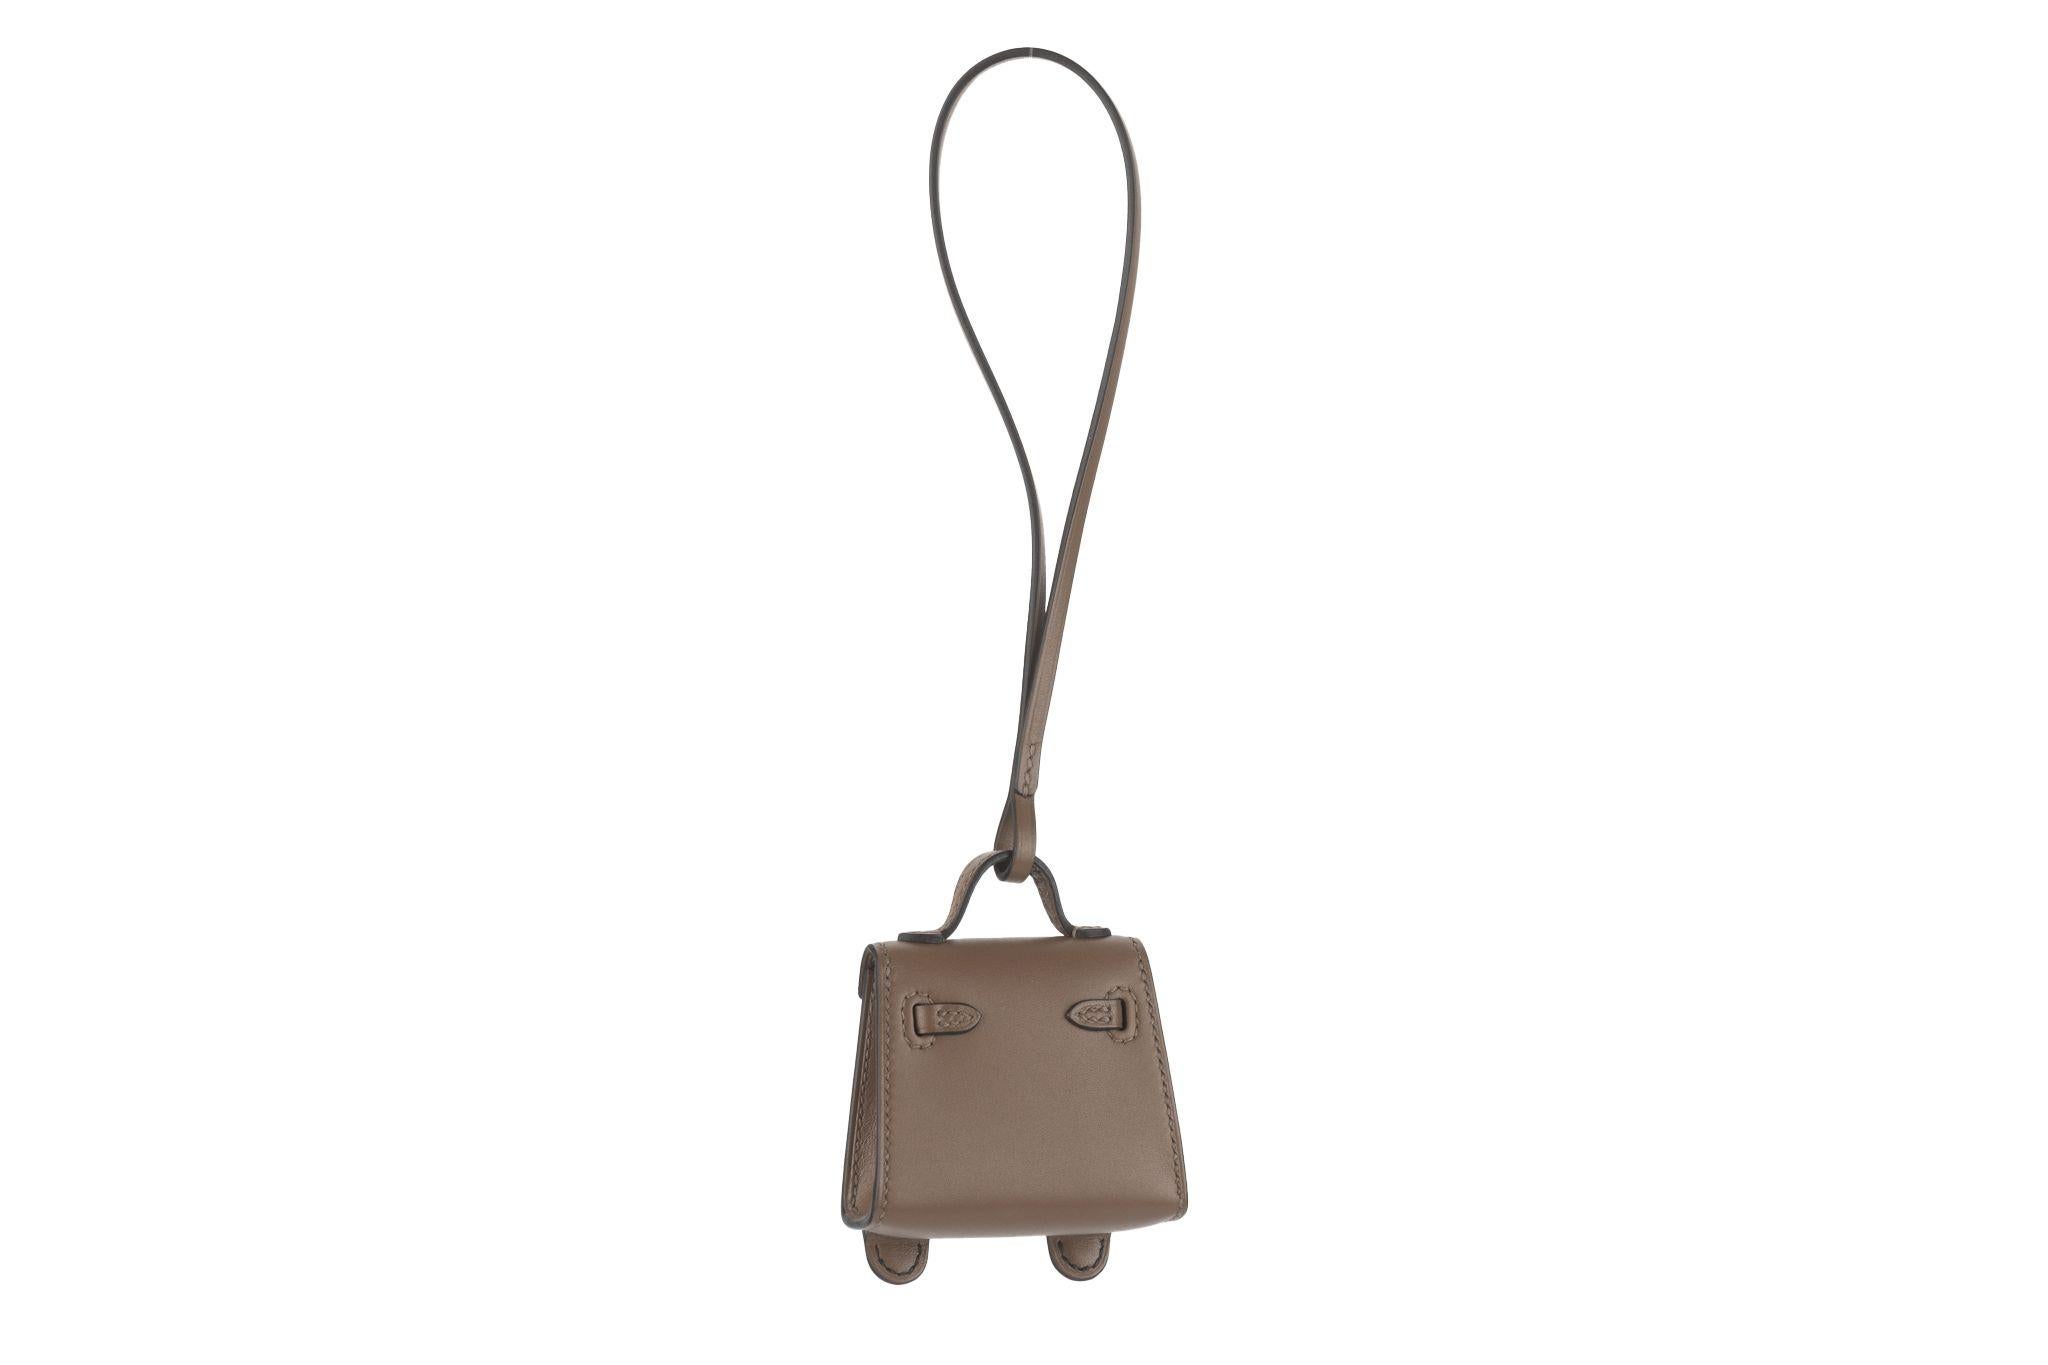 Hermès quelle idole kelly doll bag charm. Etoupe, nata, noir chevre mysore and tadelakt leather, gold tone hardware. Highly collectible and limited edition charm. Comes with original dust cover.